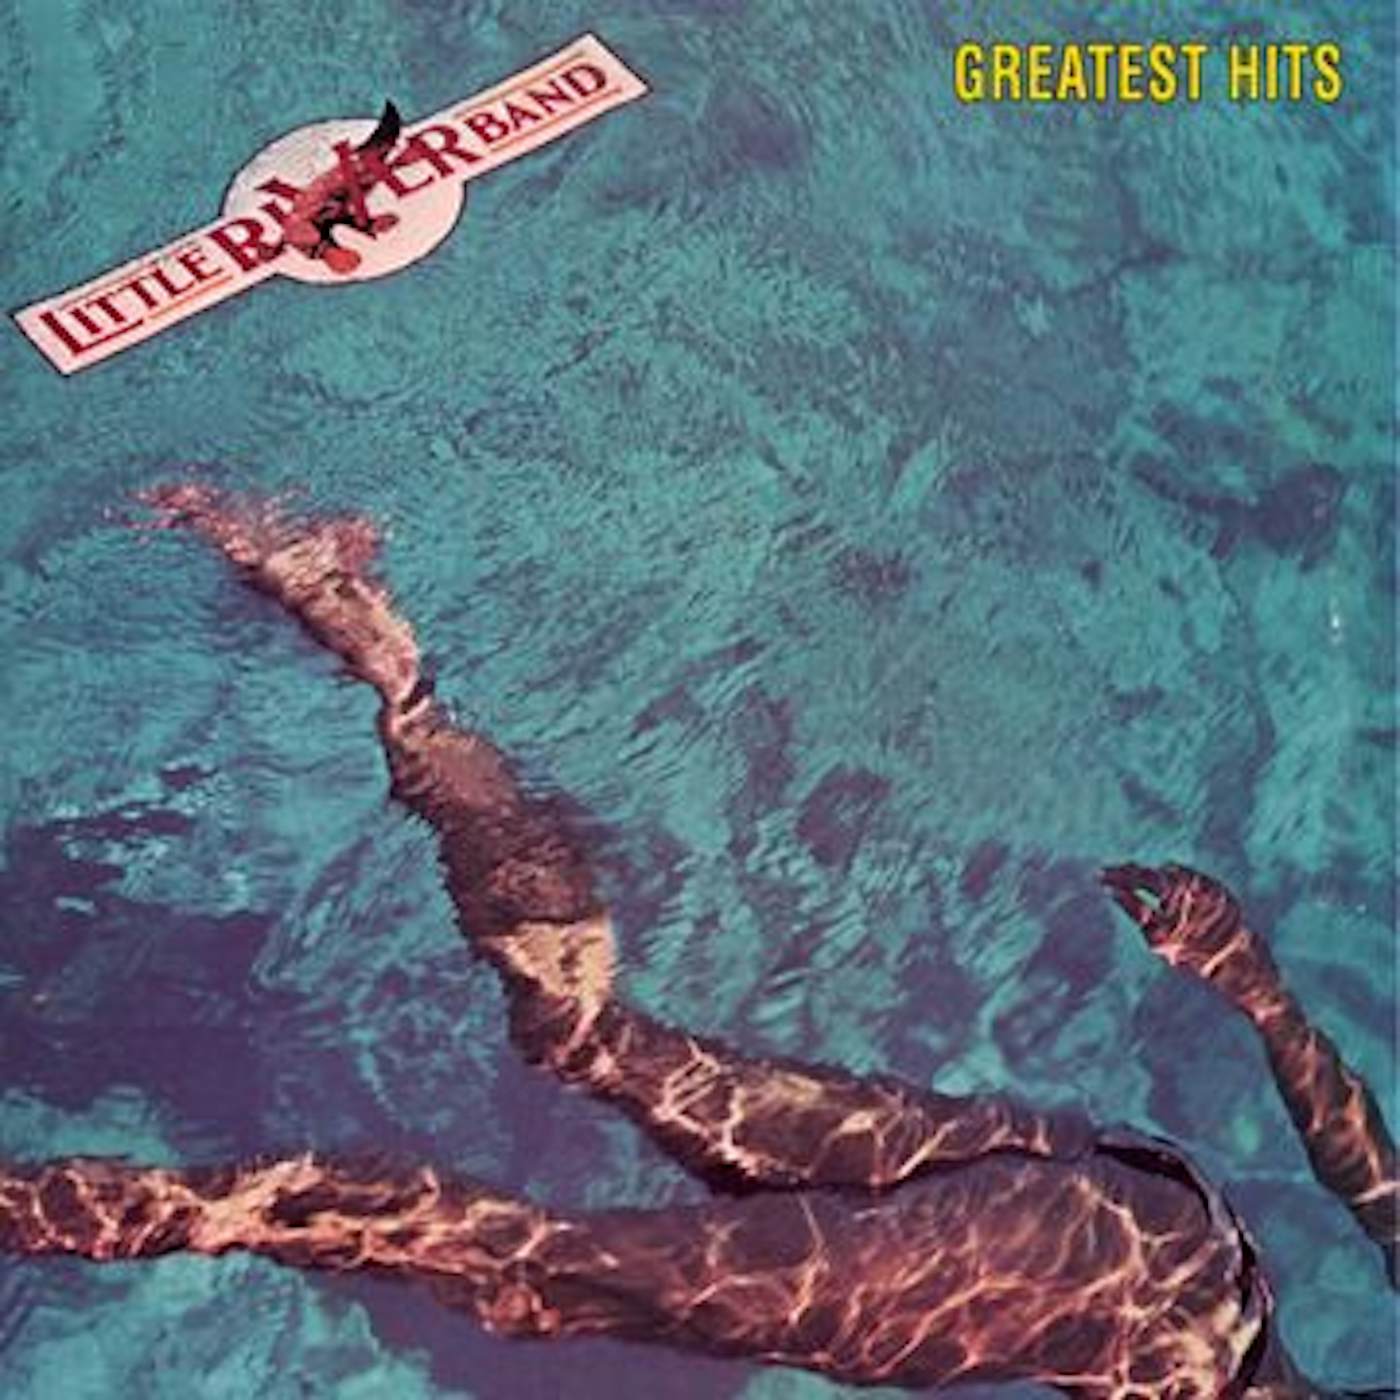 Little River Band GREATEST HITS (180G AUDIOPHILE VINYL/LIMITED ANNIVERSARY EDITION) Vinyl Record